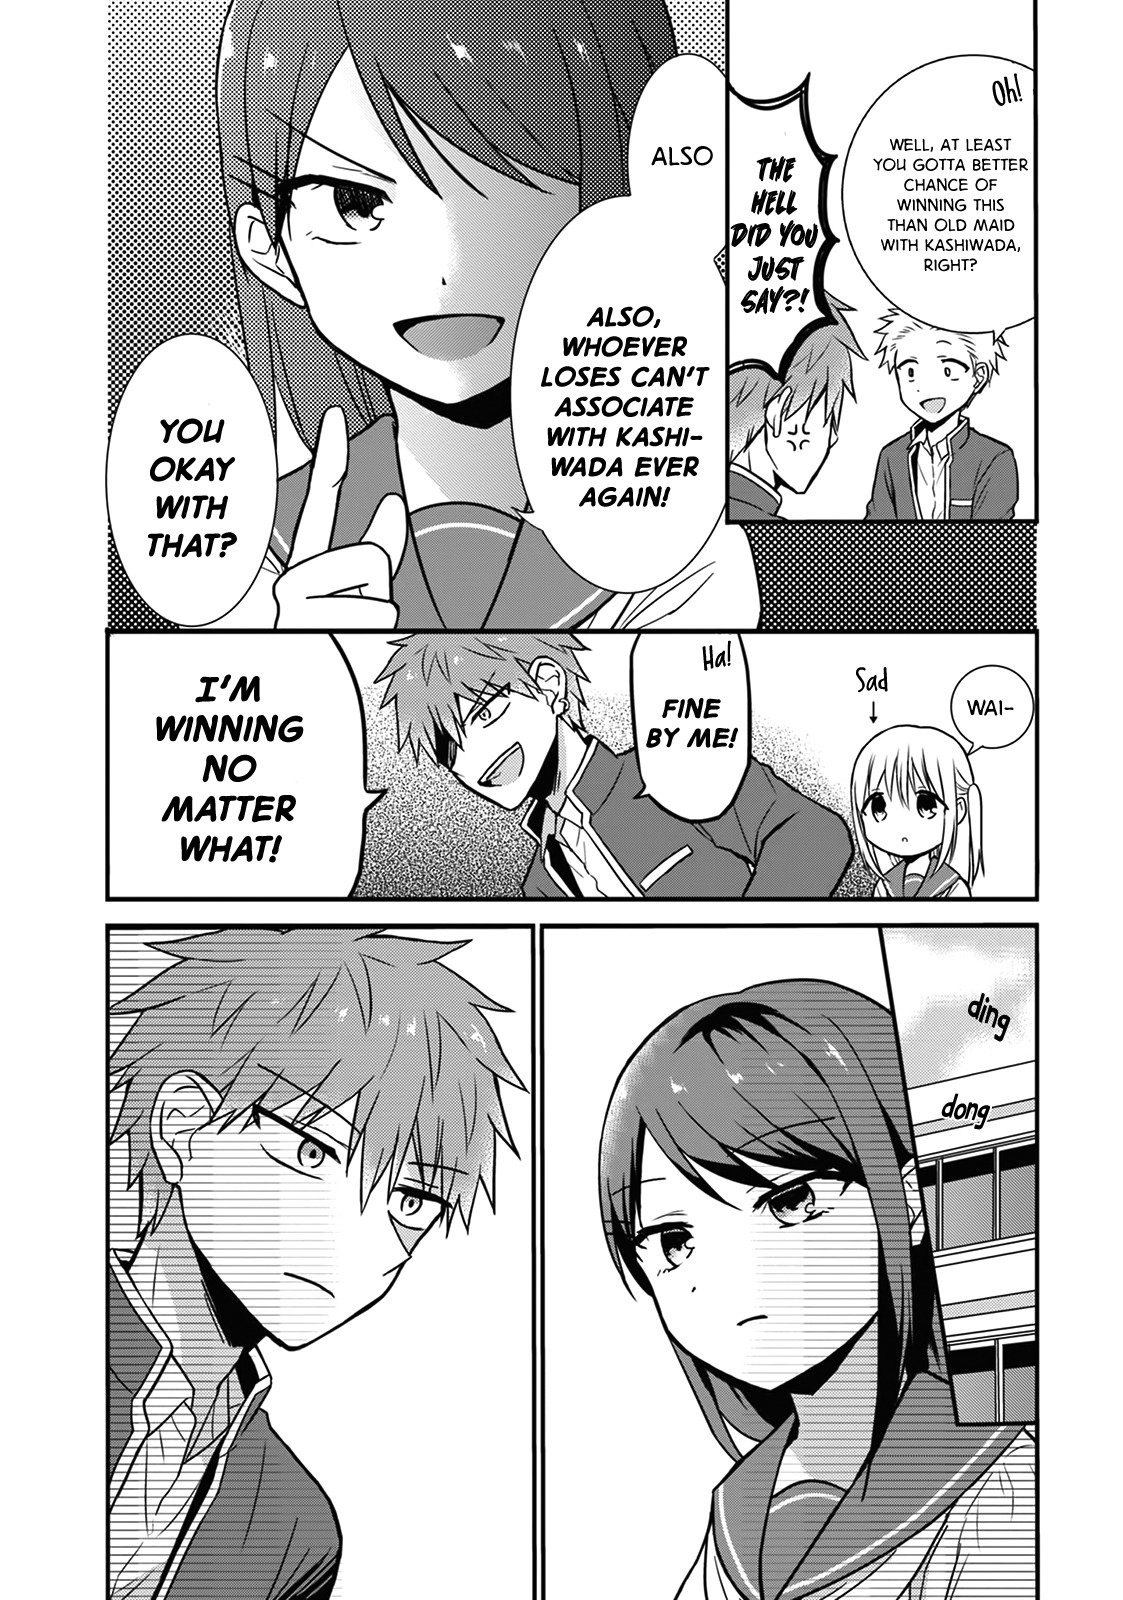 Expressionless Face Girl and Emotional Face Boy vol.1 ch.10